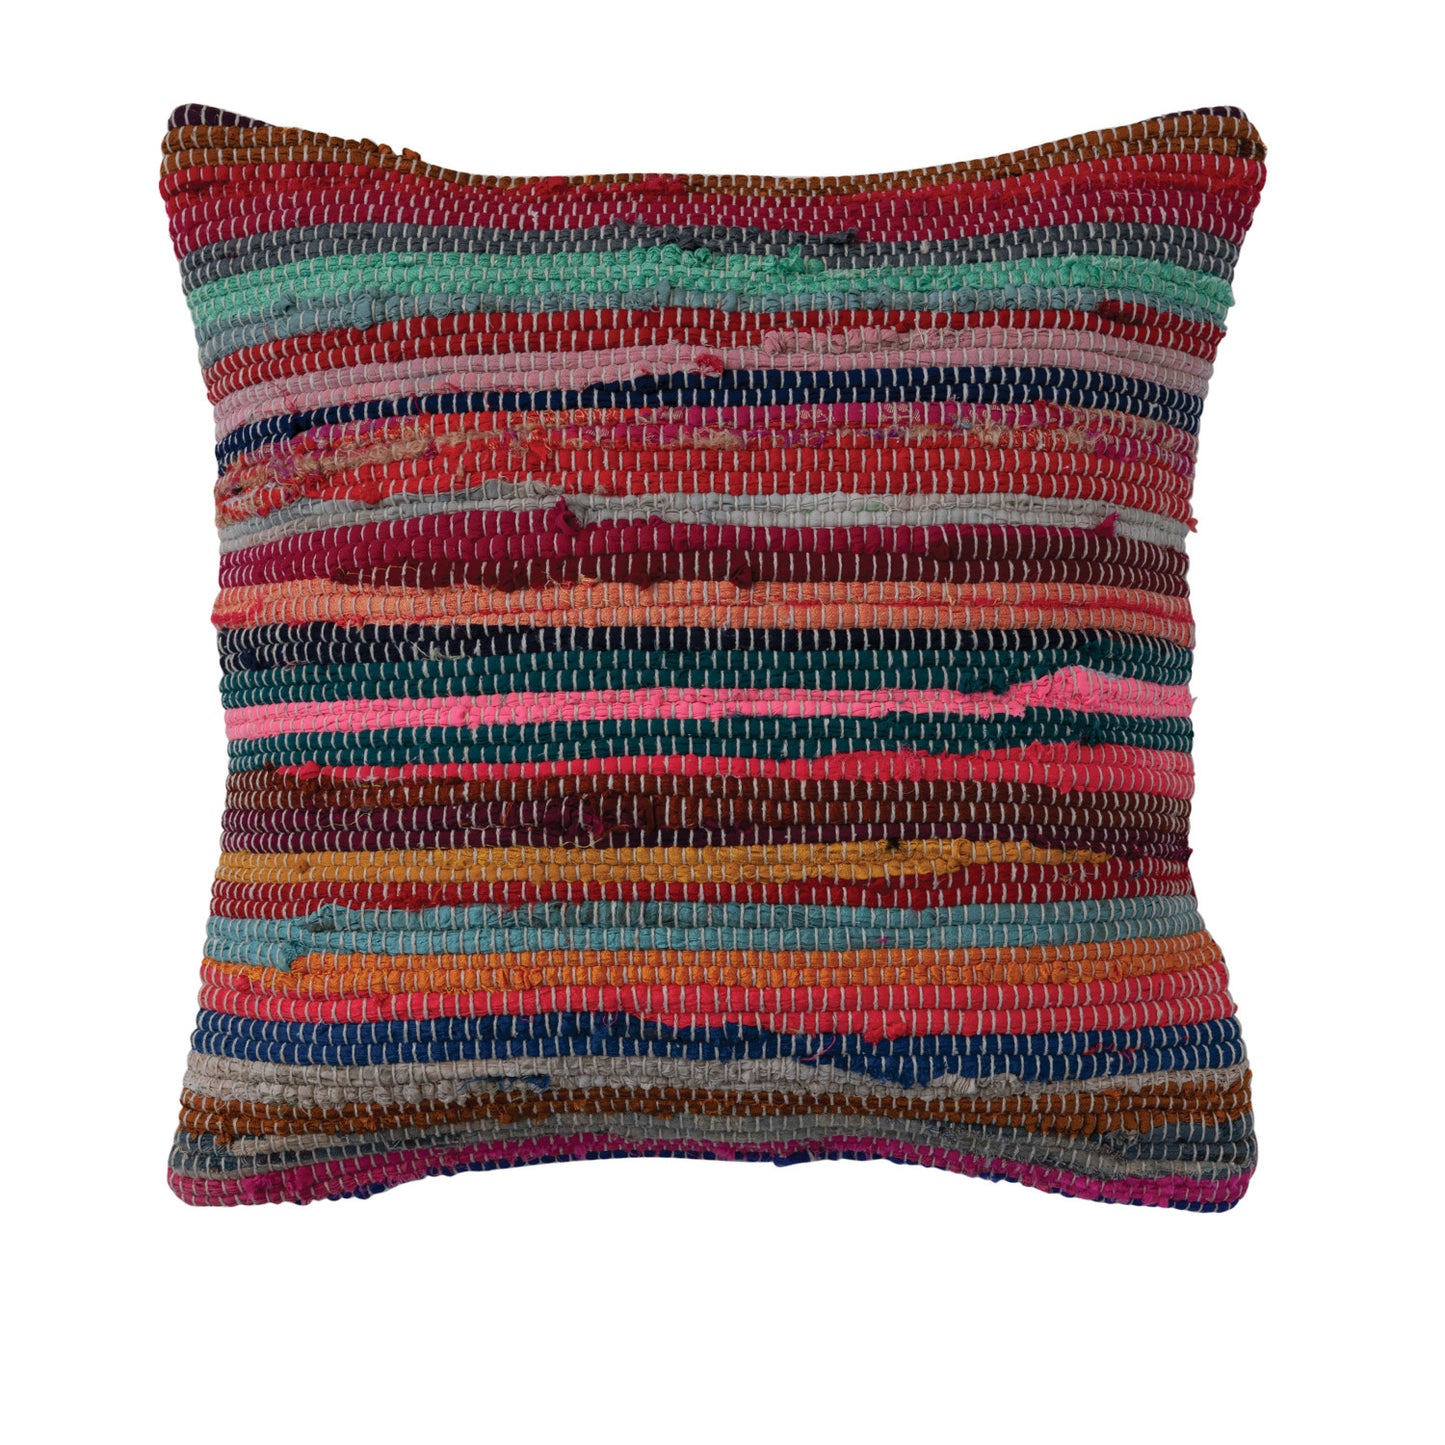 18" Woven Recycled Cotton Chindi Pillow, Polyester Fill